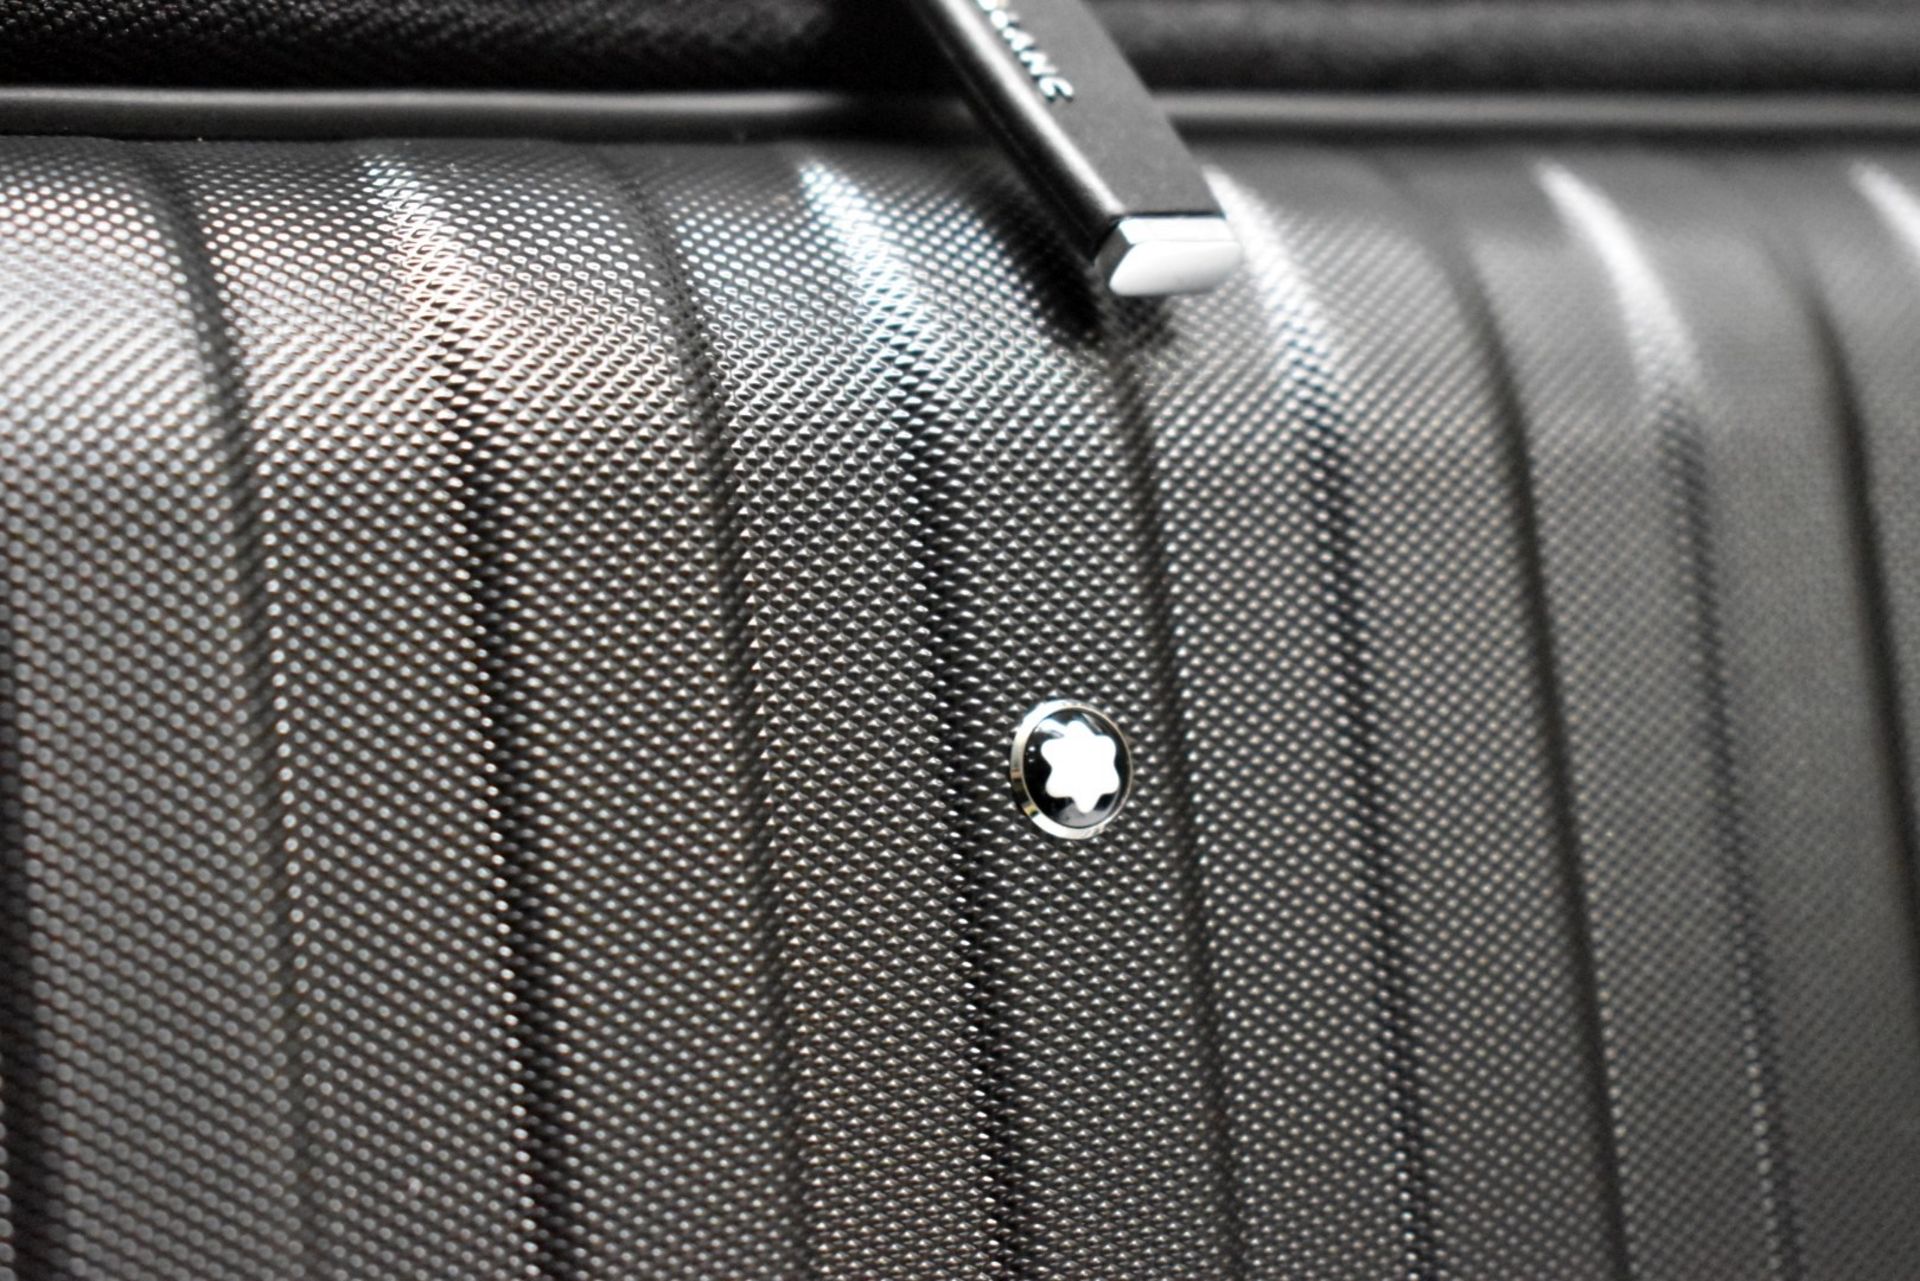 1 x MONTBLANC Polycarbonite Hand Luggage Cabin Trolley (55cm) - Original RRP £690.00 - Image 8 of 26